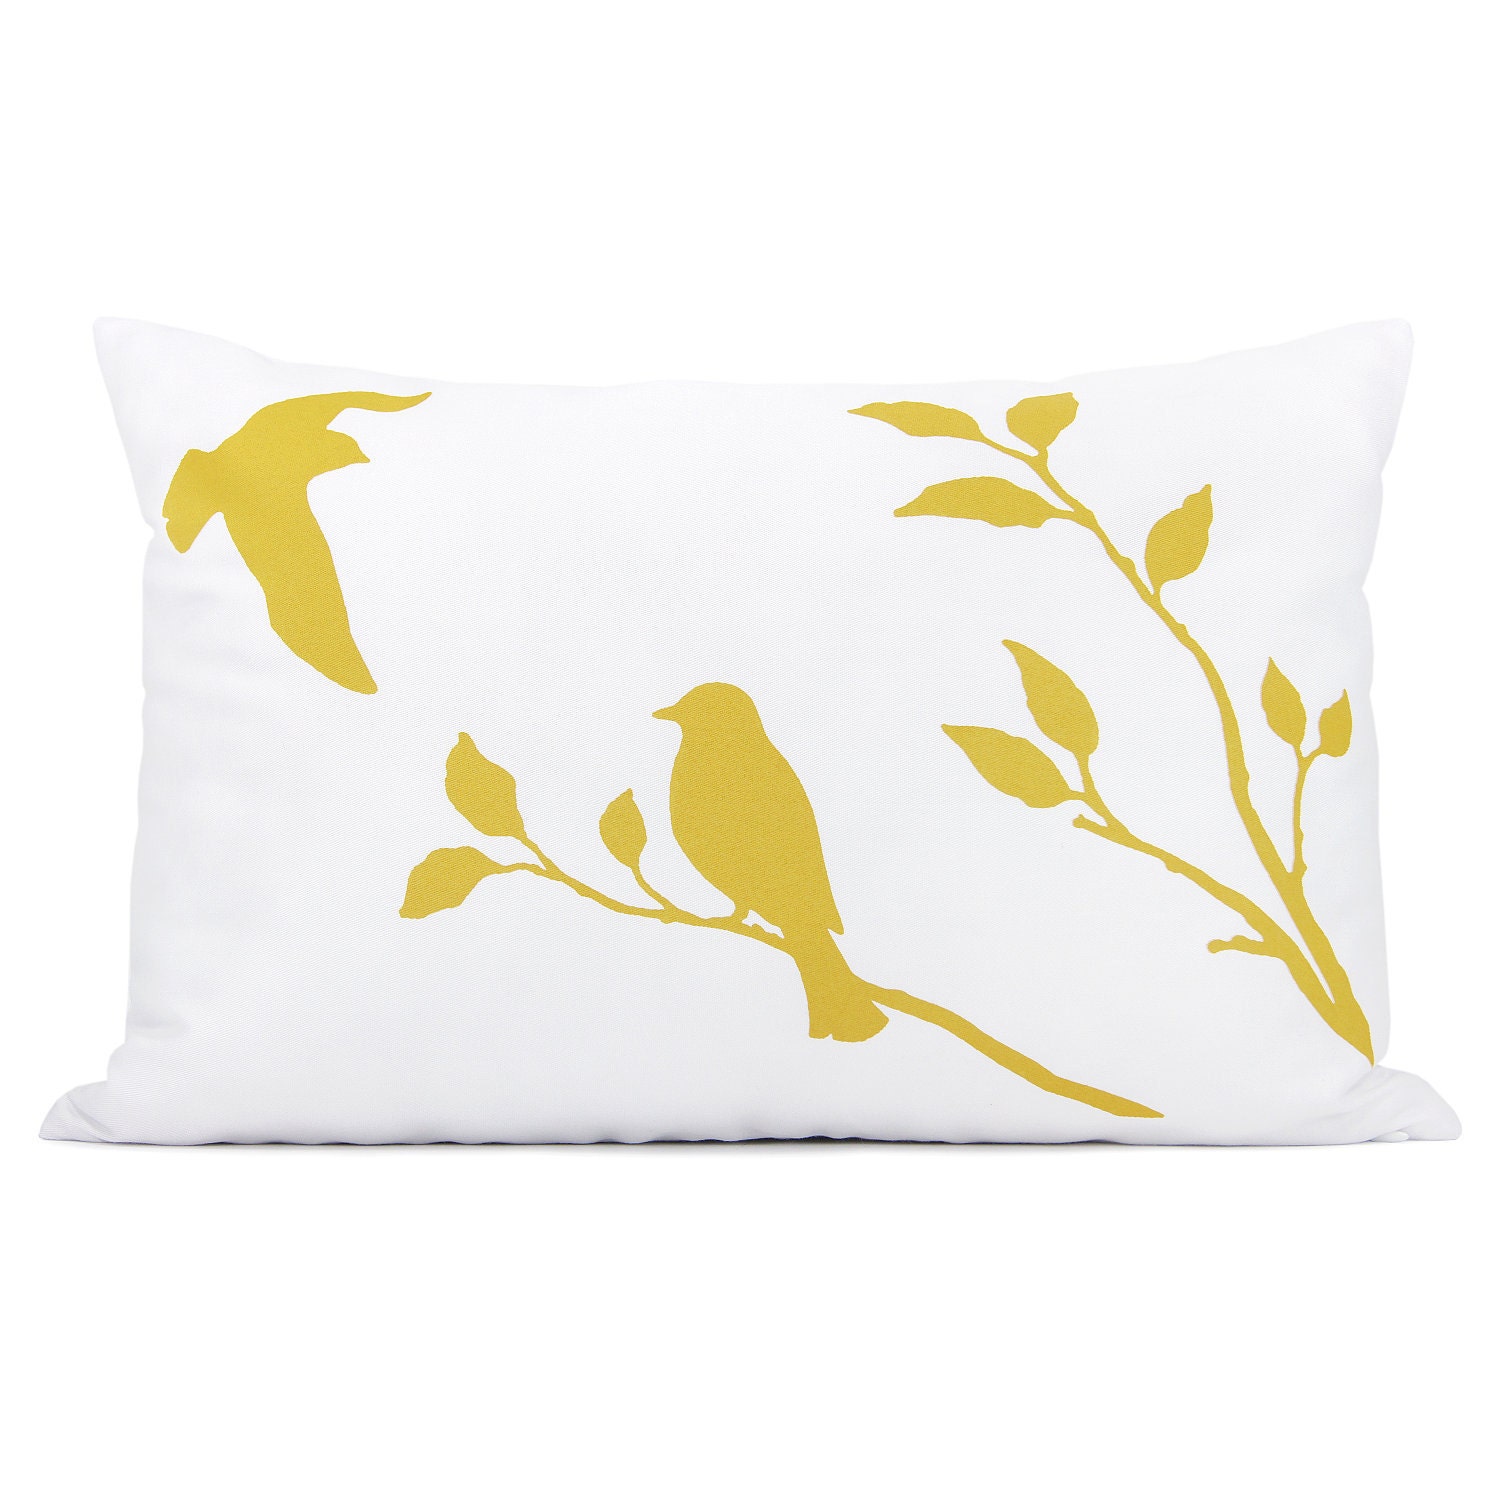 Love birds pillow cover - Mustard yellow bird in nature print on white fabric decorative pillow cover - 12x18 lumbar pillow cover - ClassicByNature